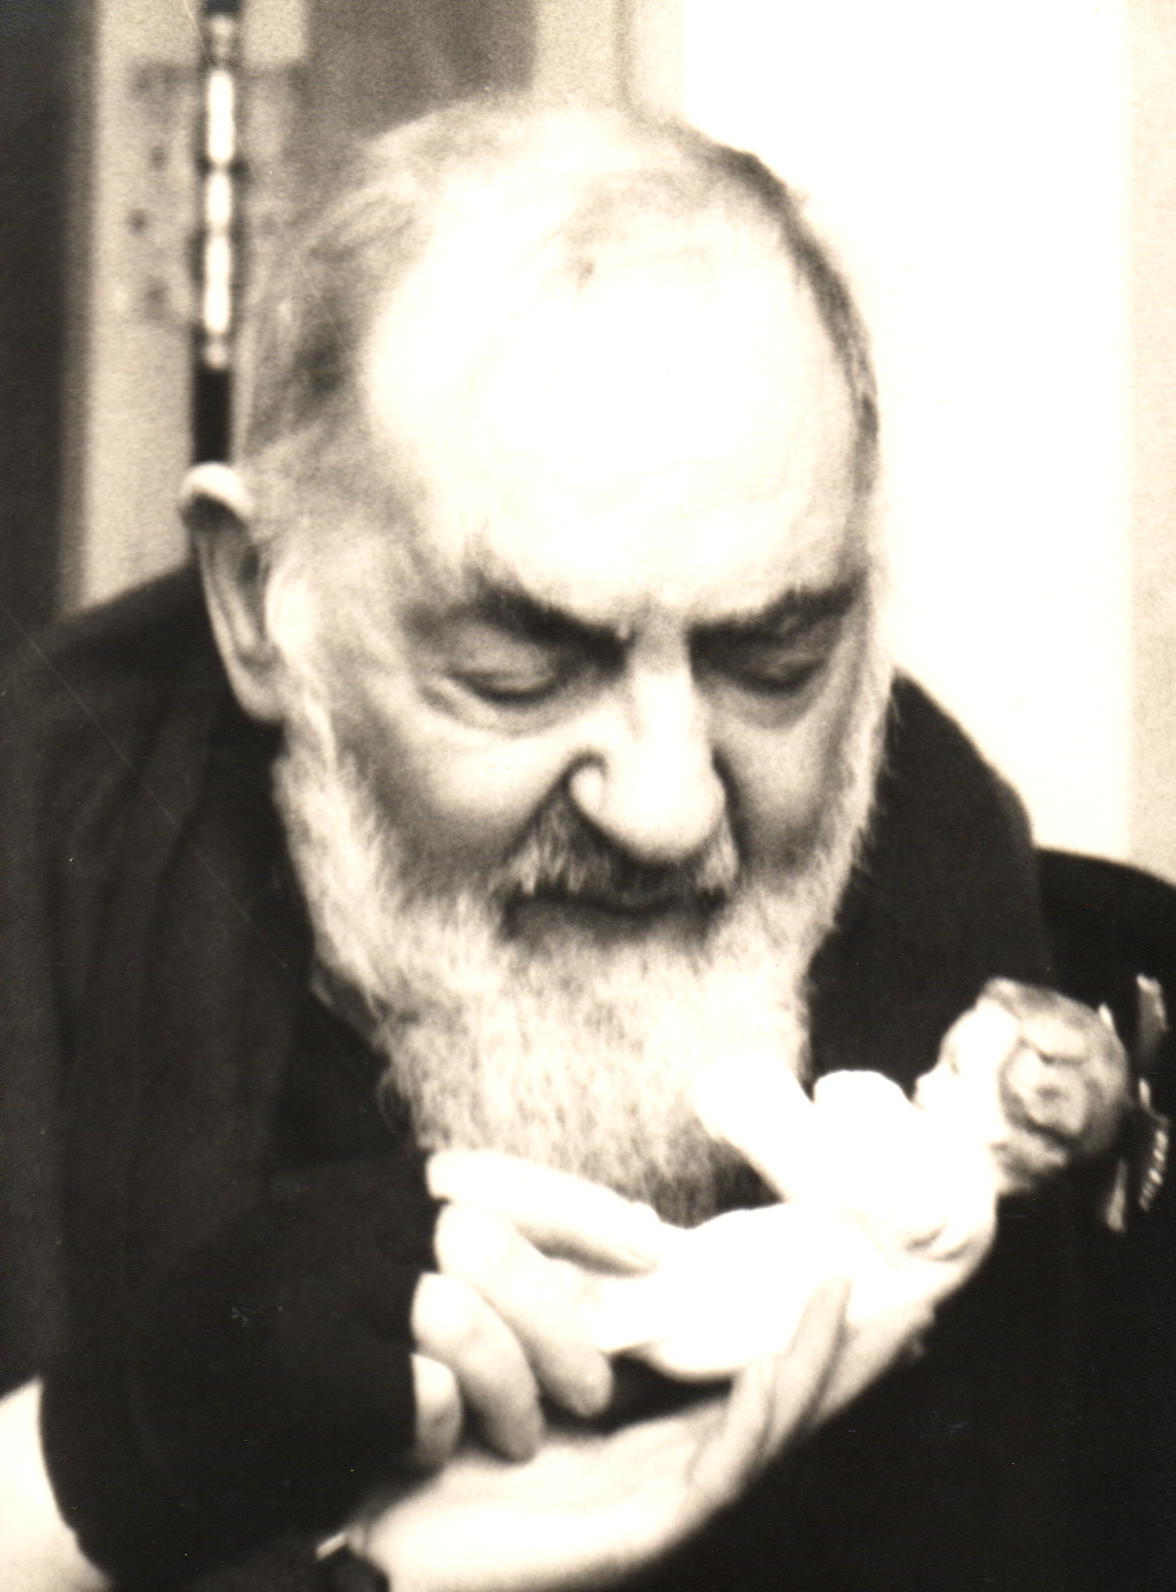 Padre Pio in his own words about hymself, God, Jesus, Holy Spirit, Church, Mary, virtues, temptation, agitation.